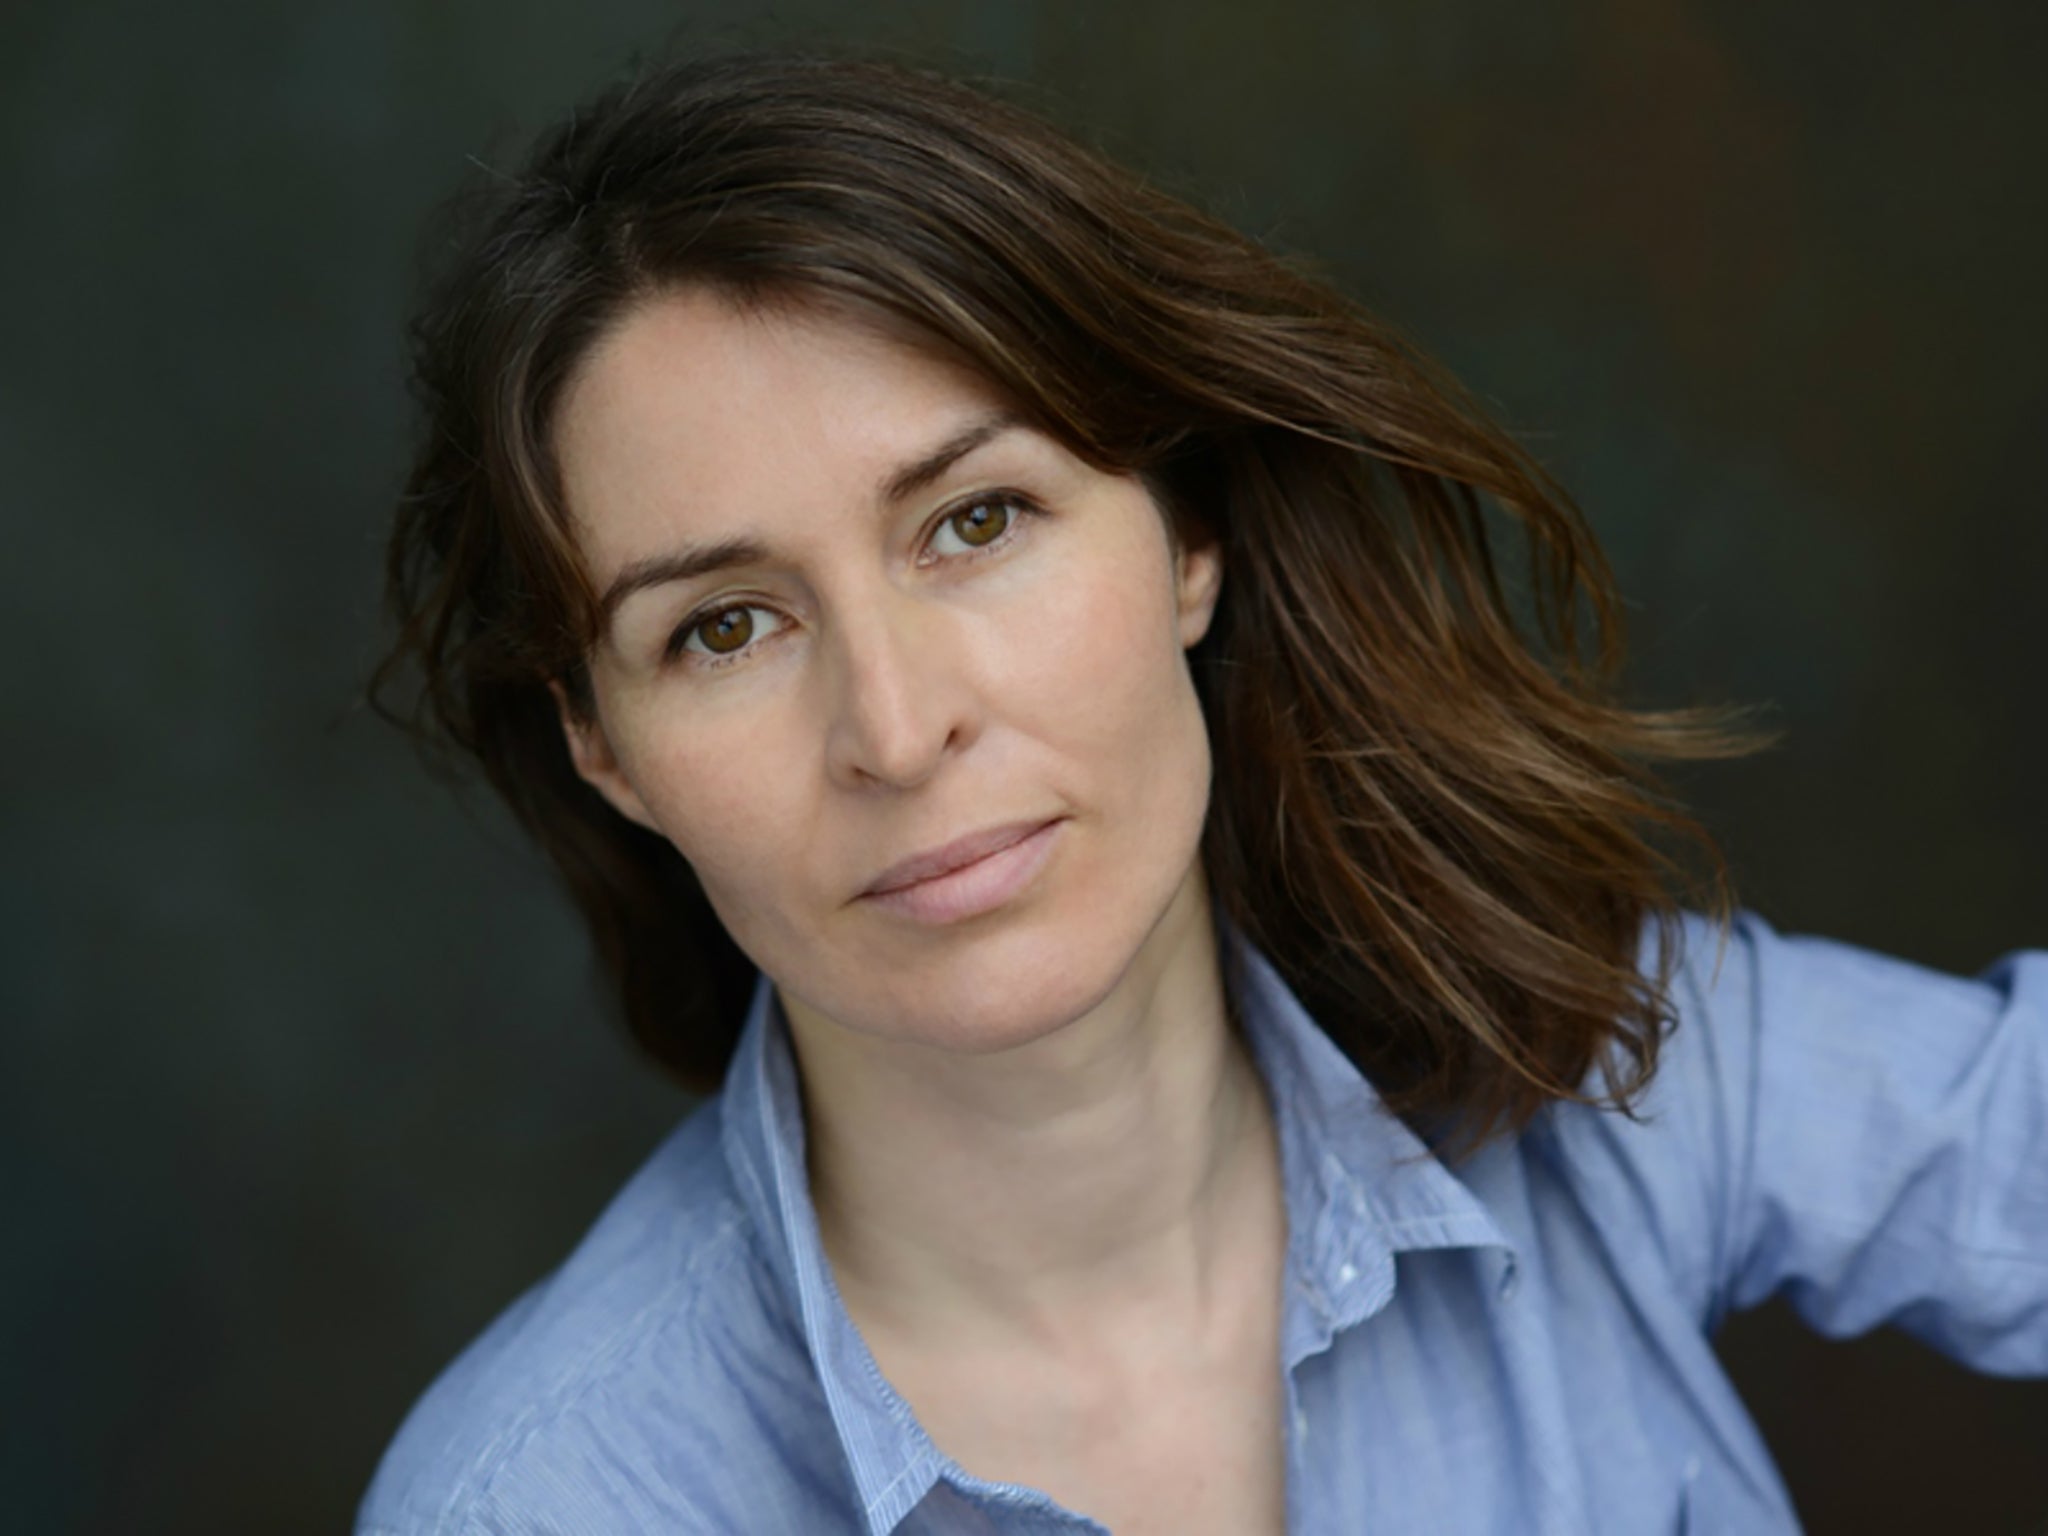 Helen Baxendale interview Nobody asks me to do sex scenes now, which is a great relief The Independent pic